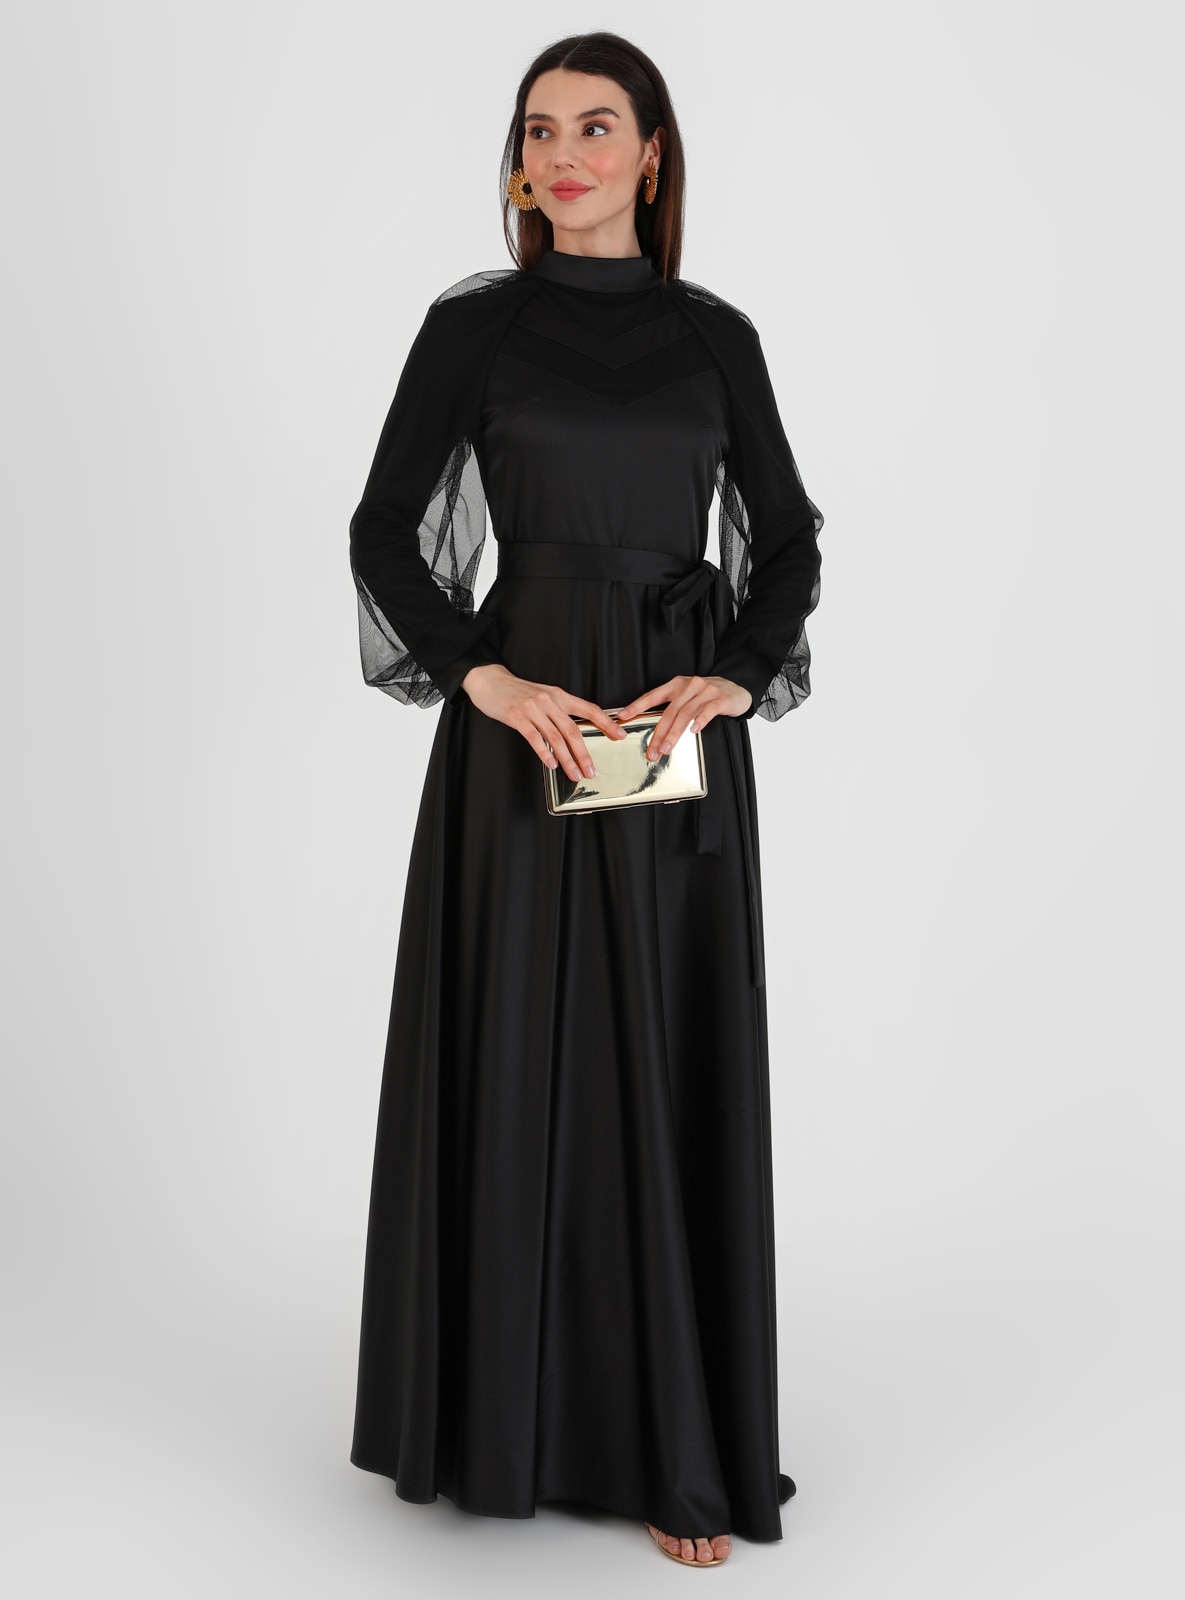 Black - Fully Lined - Polo neck - Modest Evening Dress